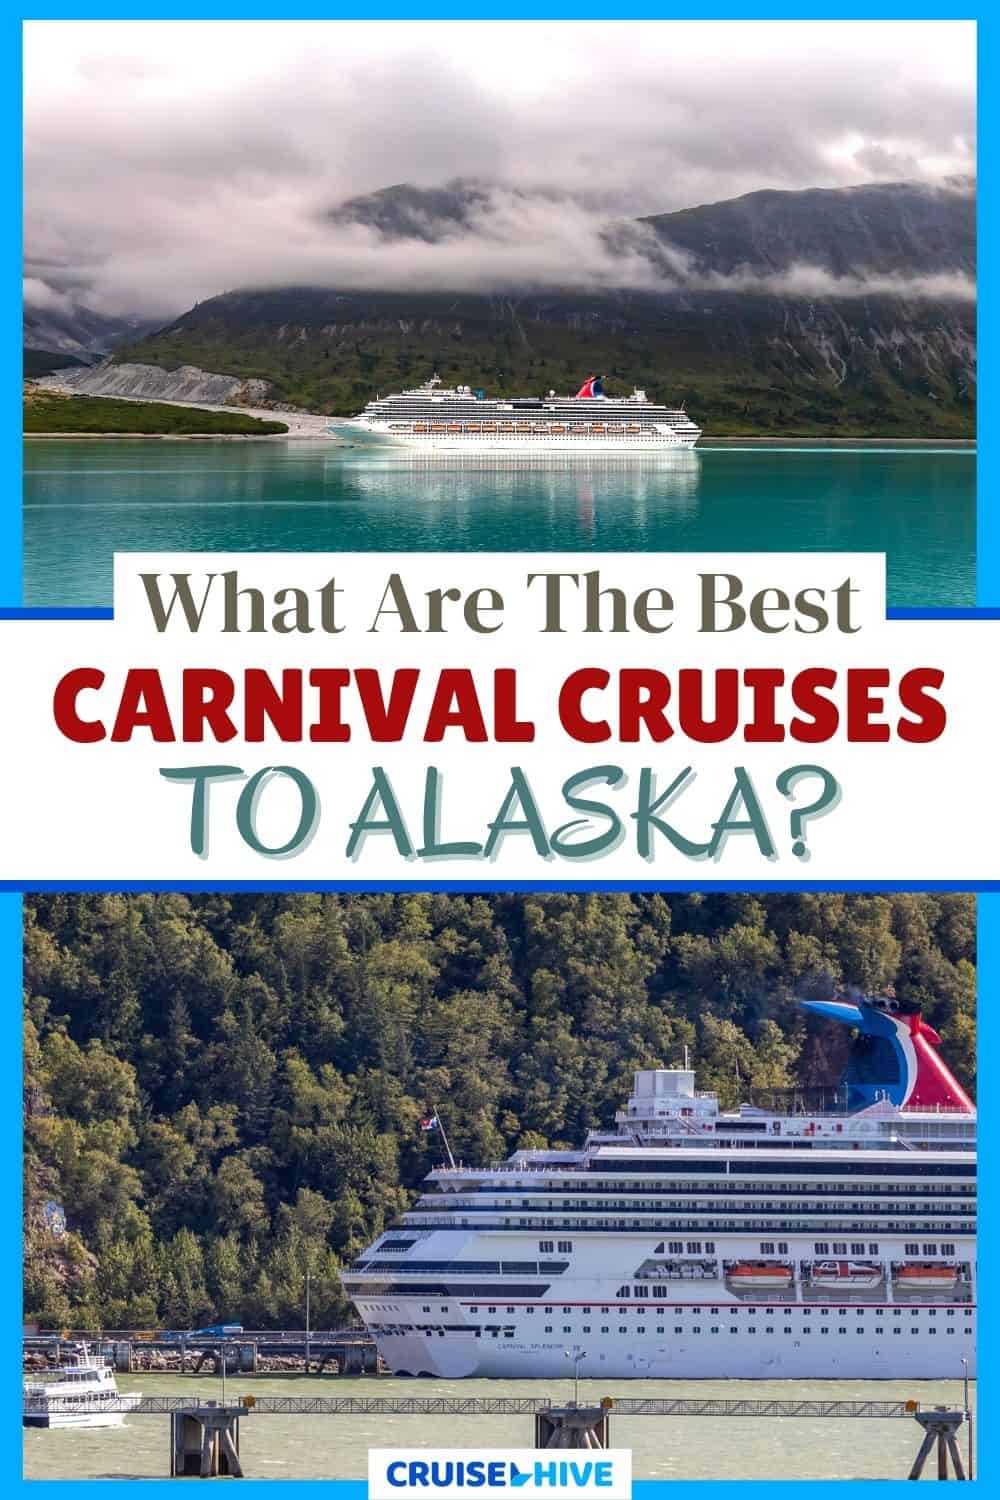 What Are the Best Carnival Cruises to Alaska